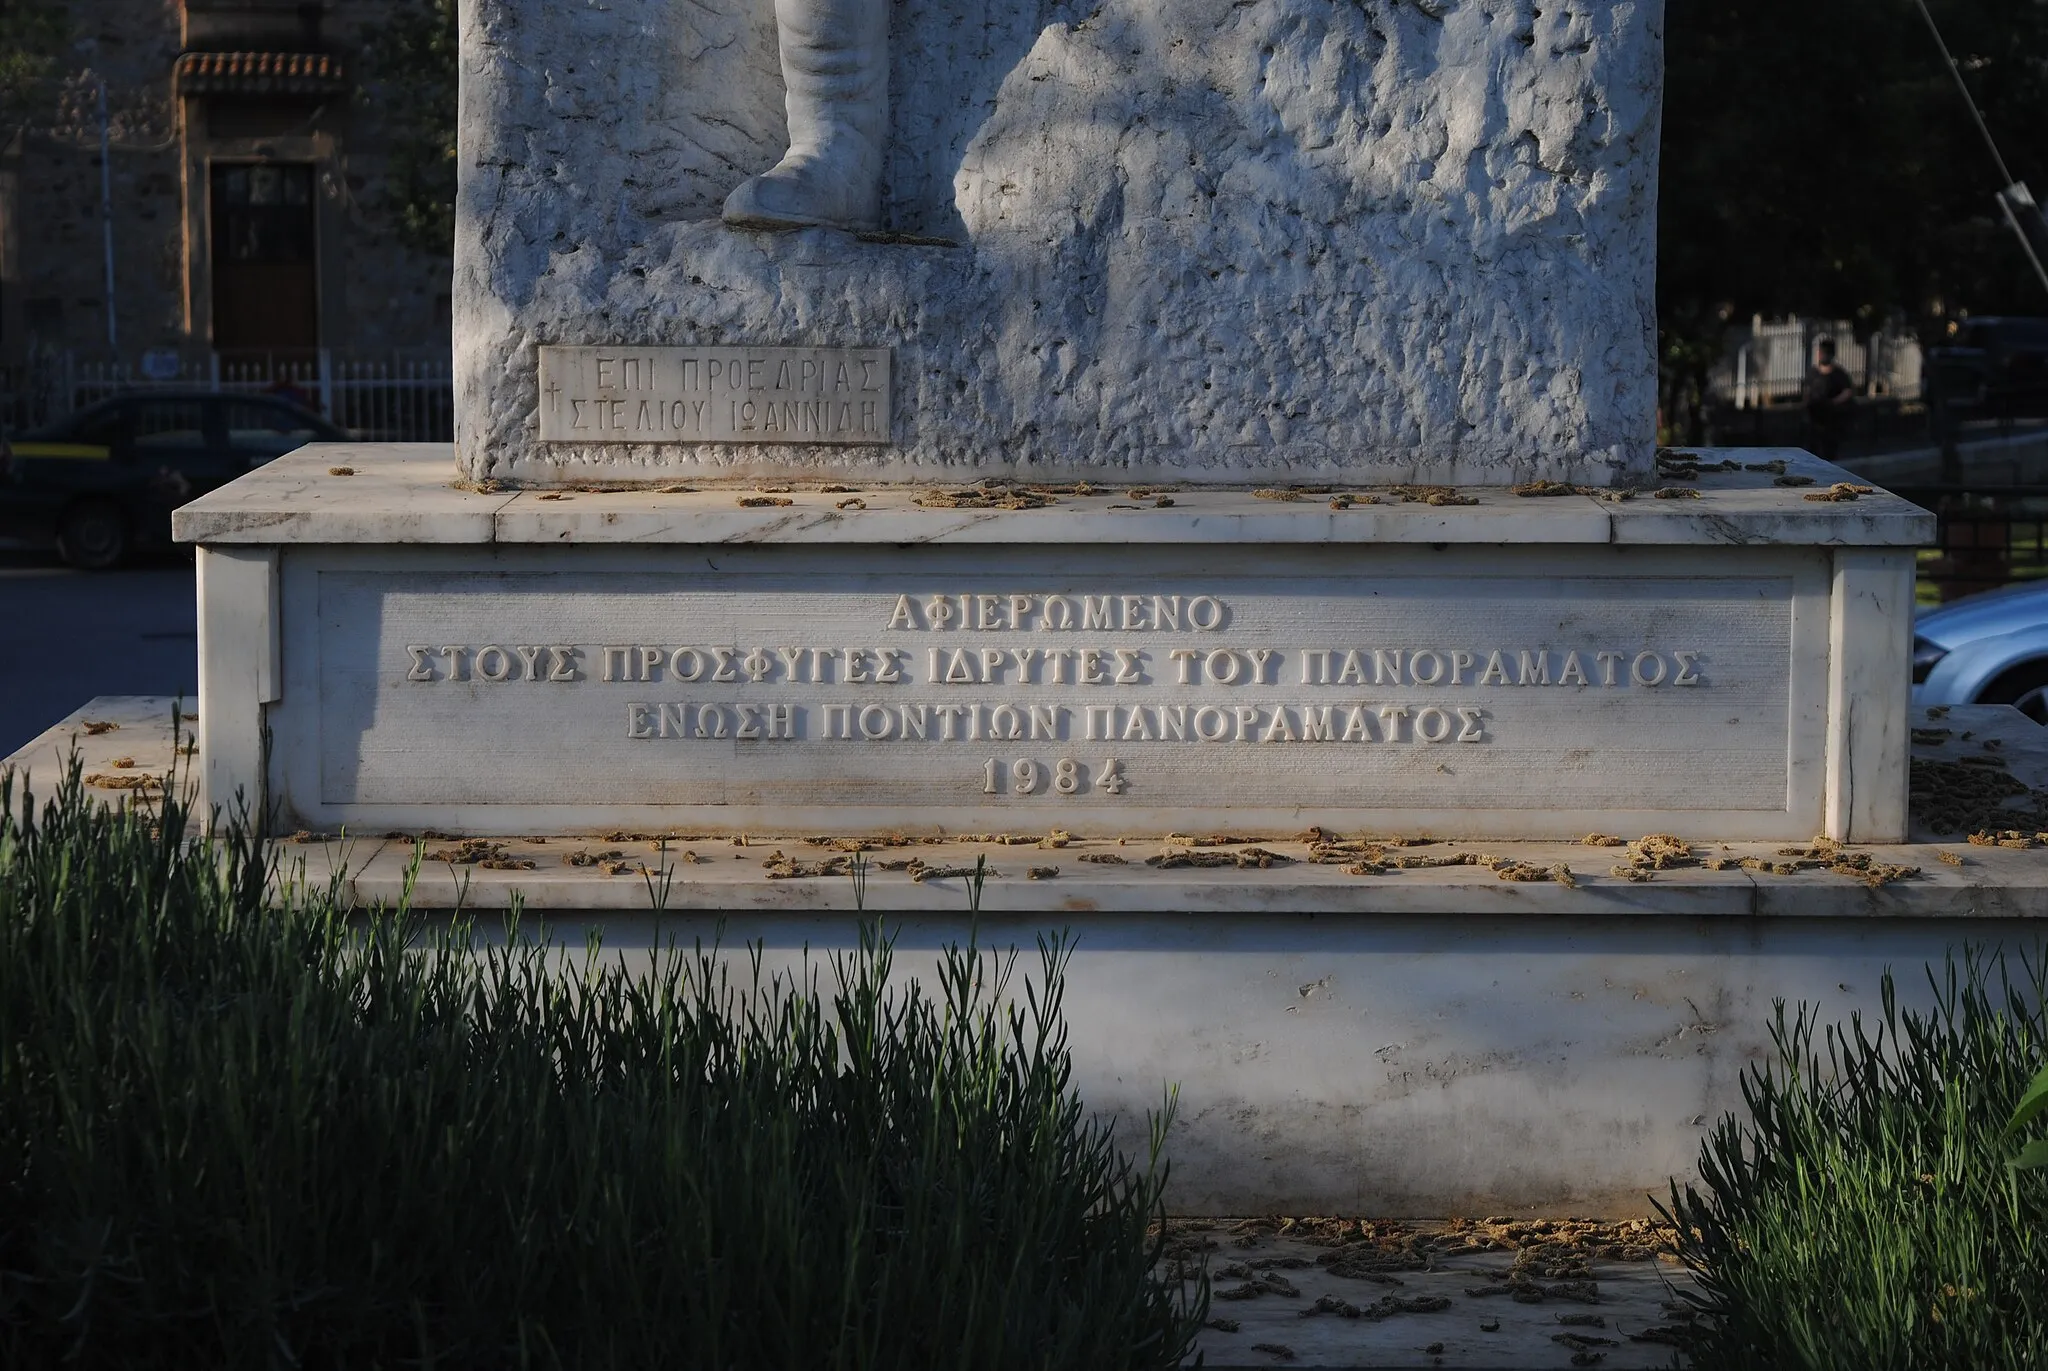 Photo showing: War memorial in Panorama, Greece. It reads "Tribute to the refugee founders of Panorama. Union of Pontic Greeks of Panorama. 1984"